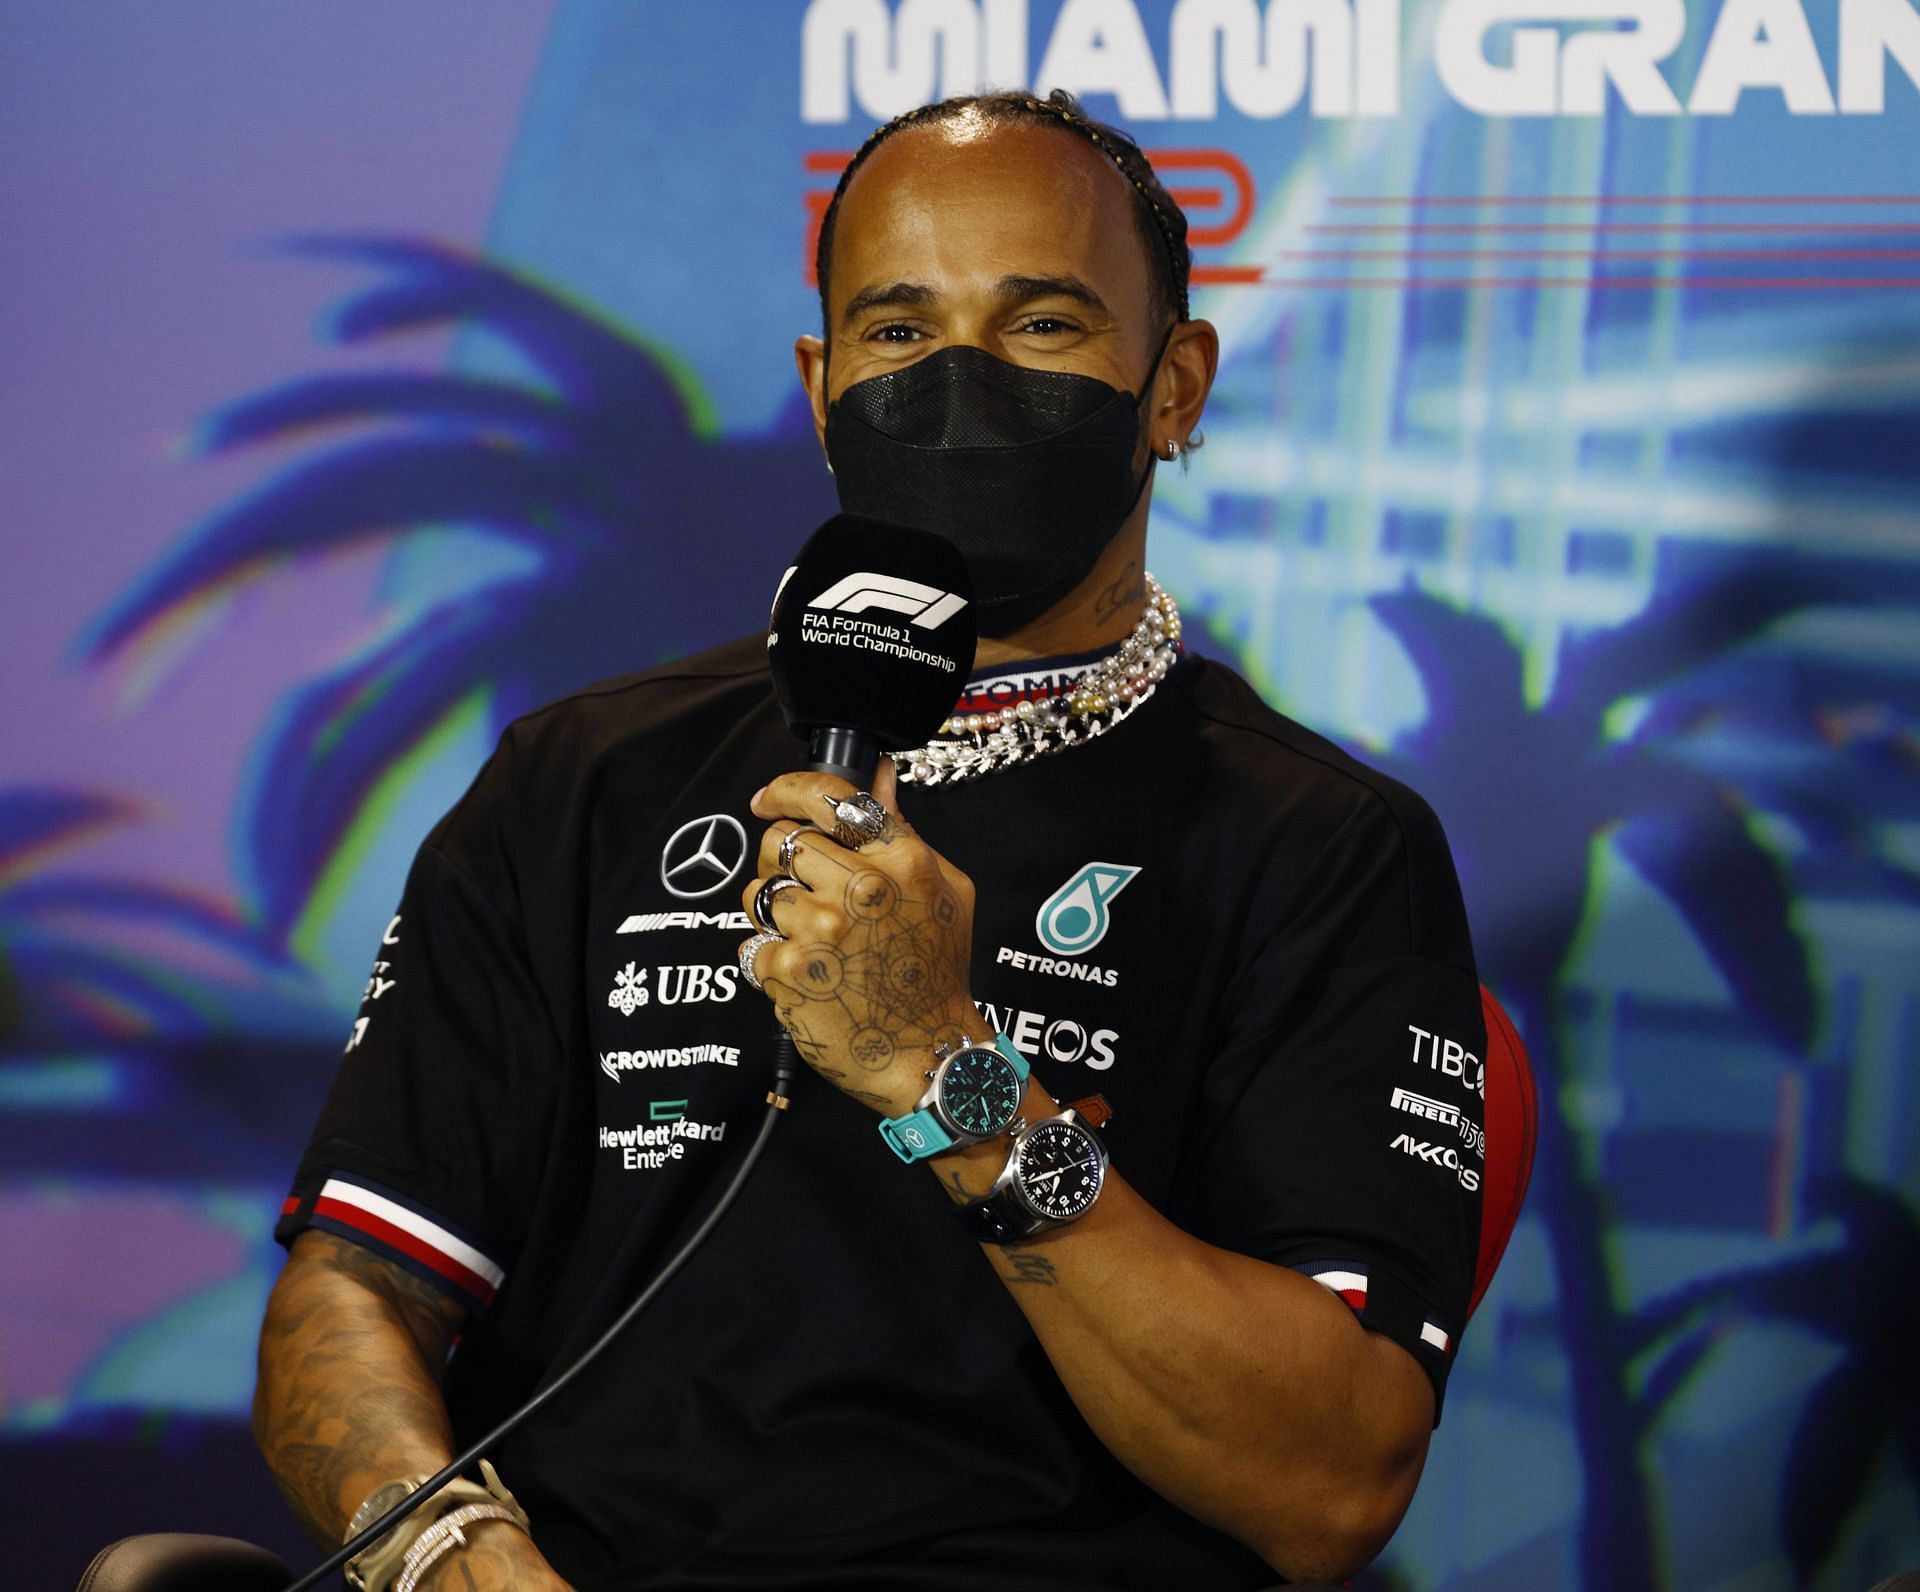 The Mercedes driver now has the exemption to wear his jewelry